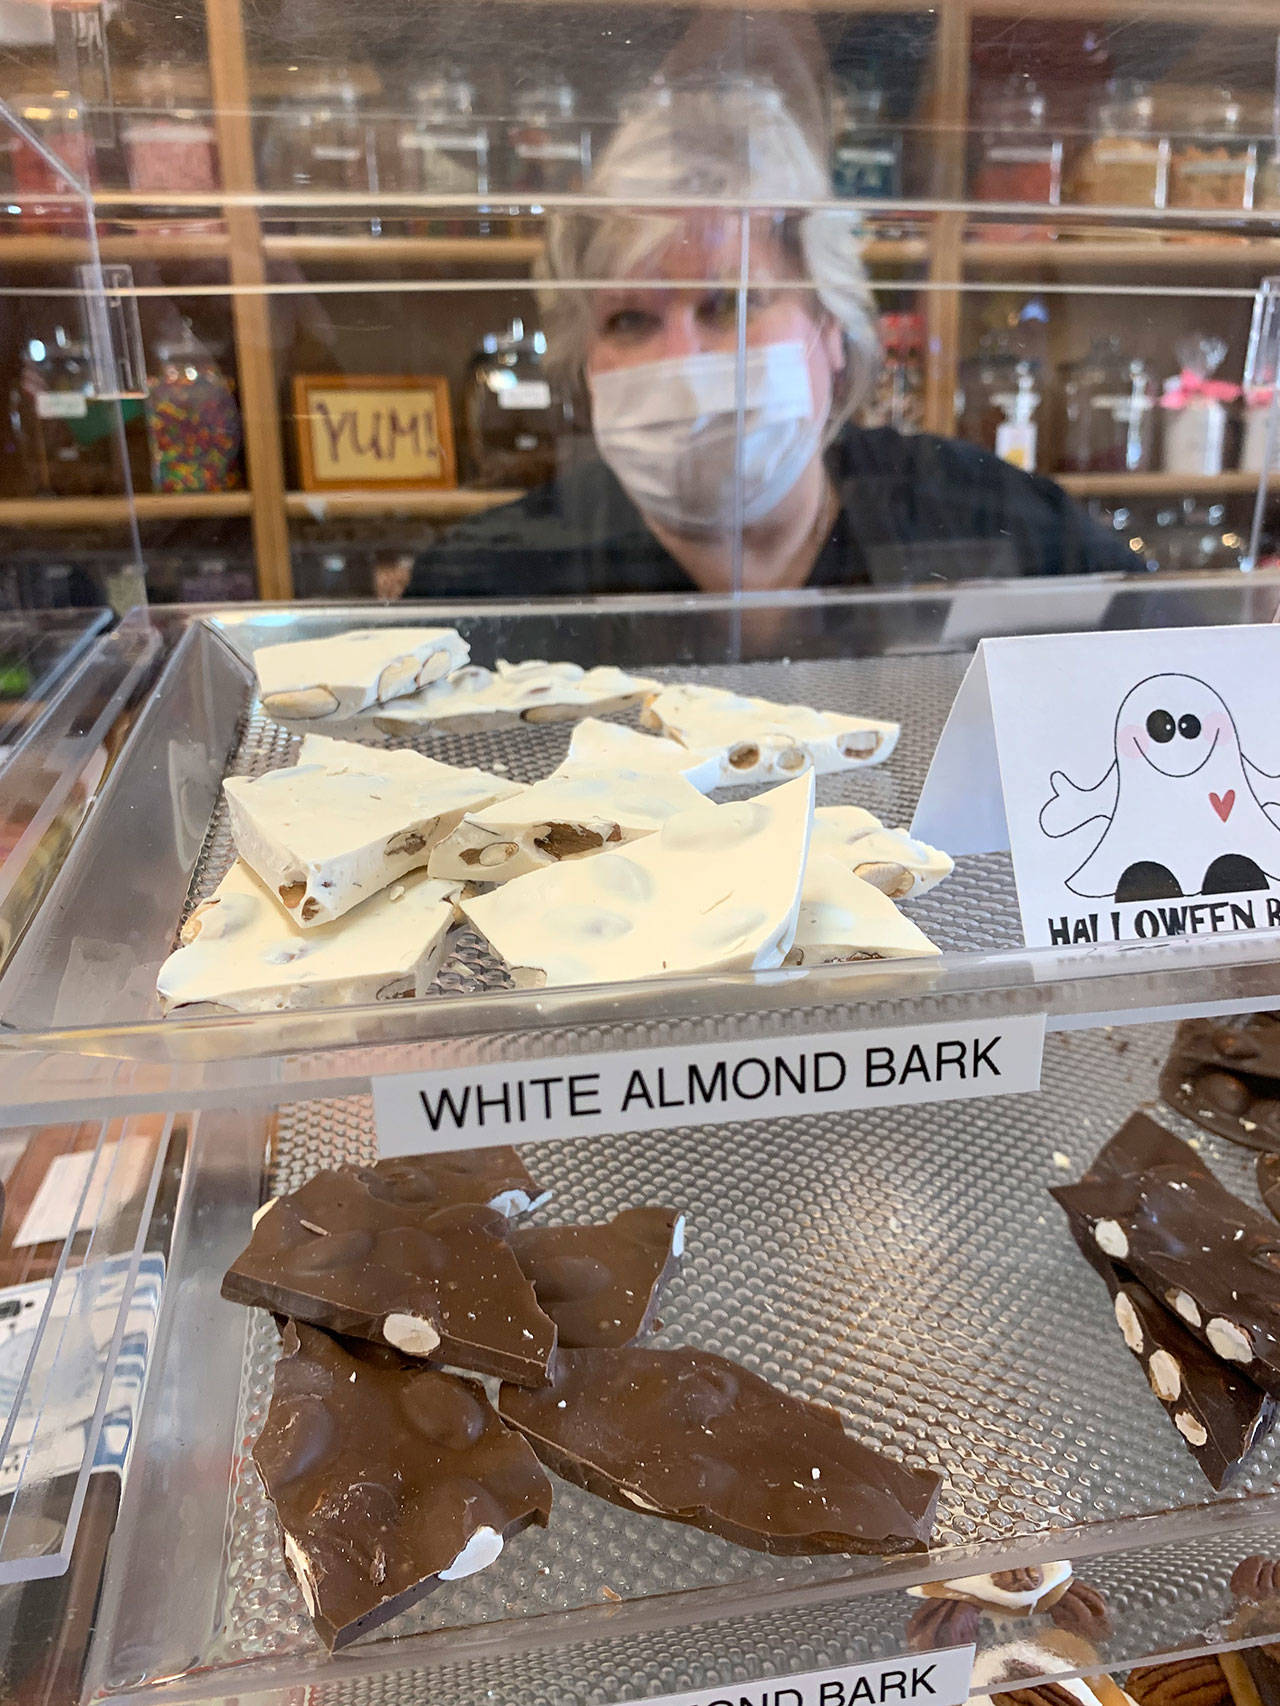 Milk and white chocolate almond bark are favorites of customers visiting The Candy Shoppe in Port Orchard. (Bob Smith | Kitsap Daily News)